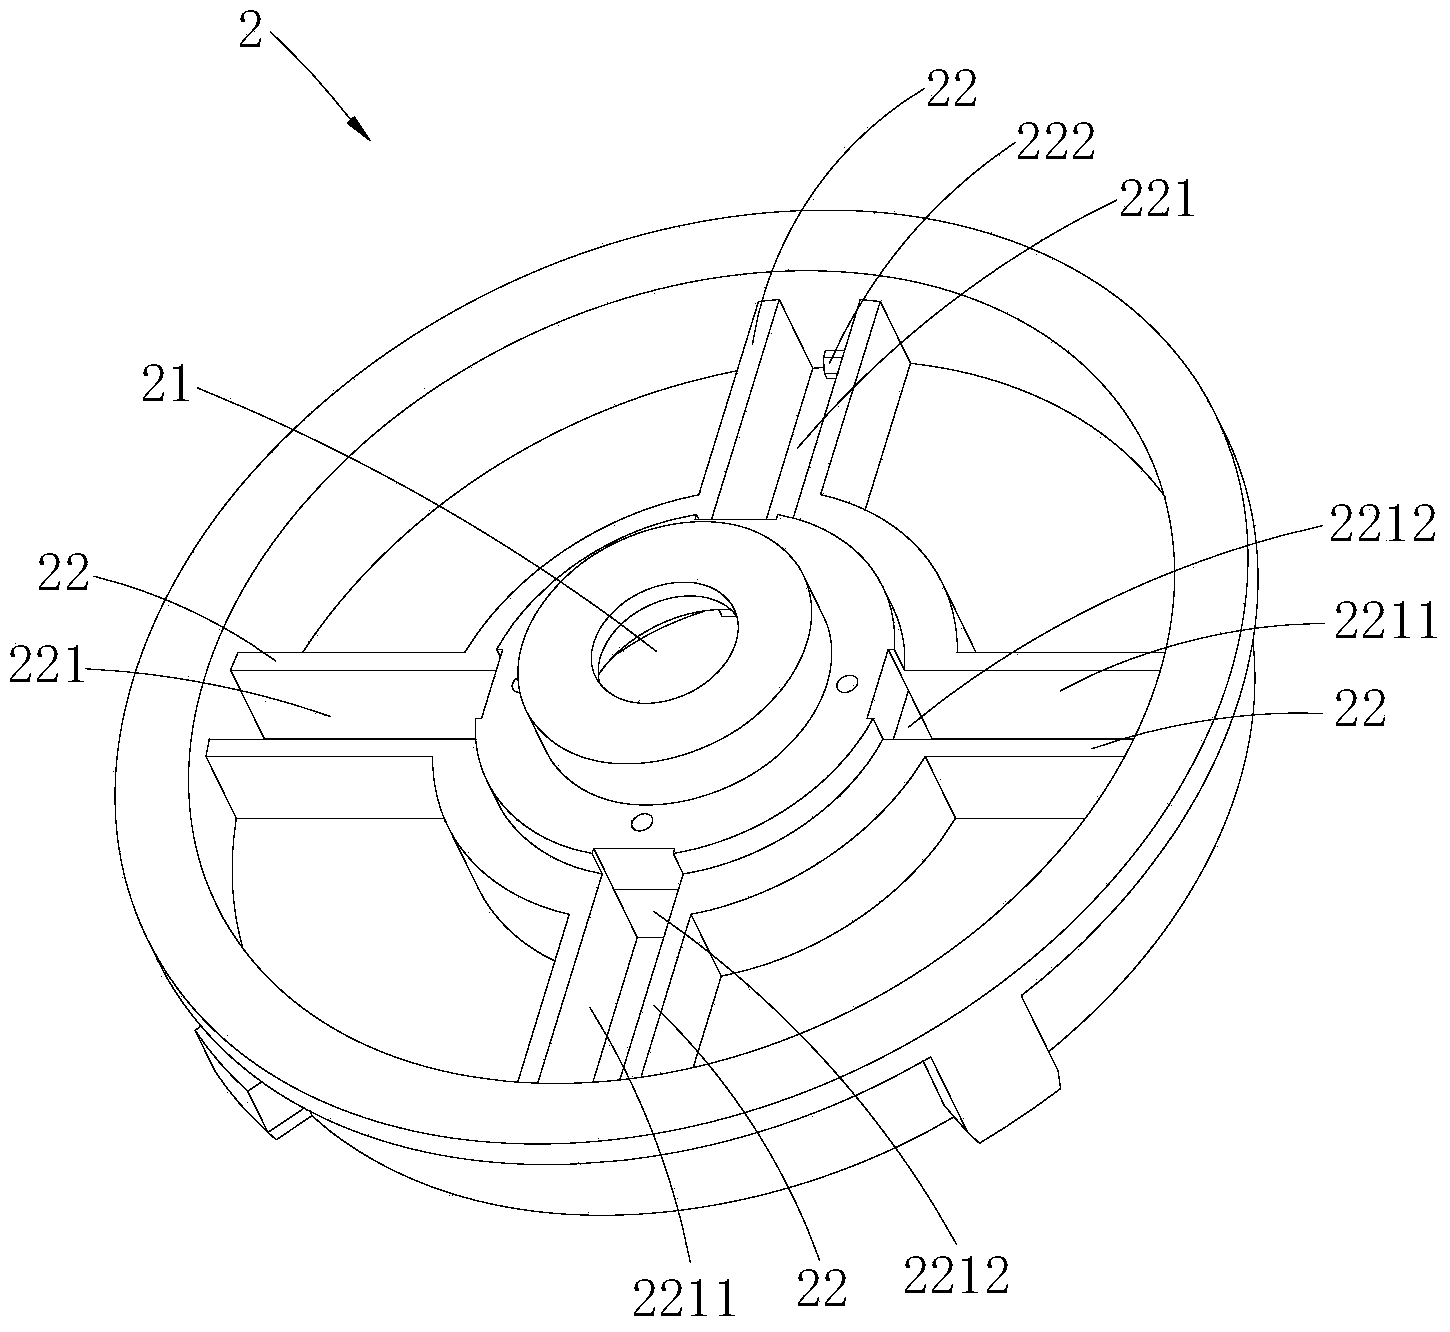 Carbon brush mounting structure, motor and motor assembling method